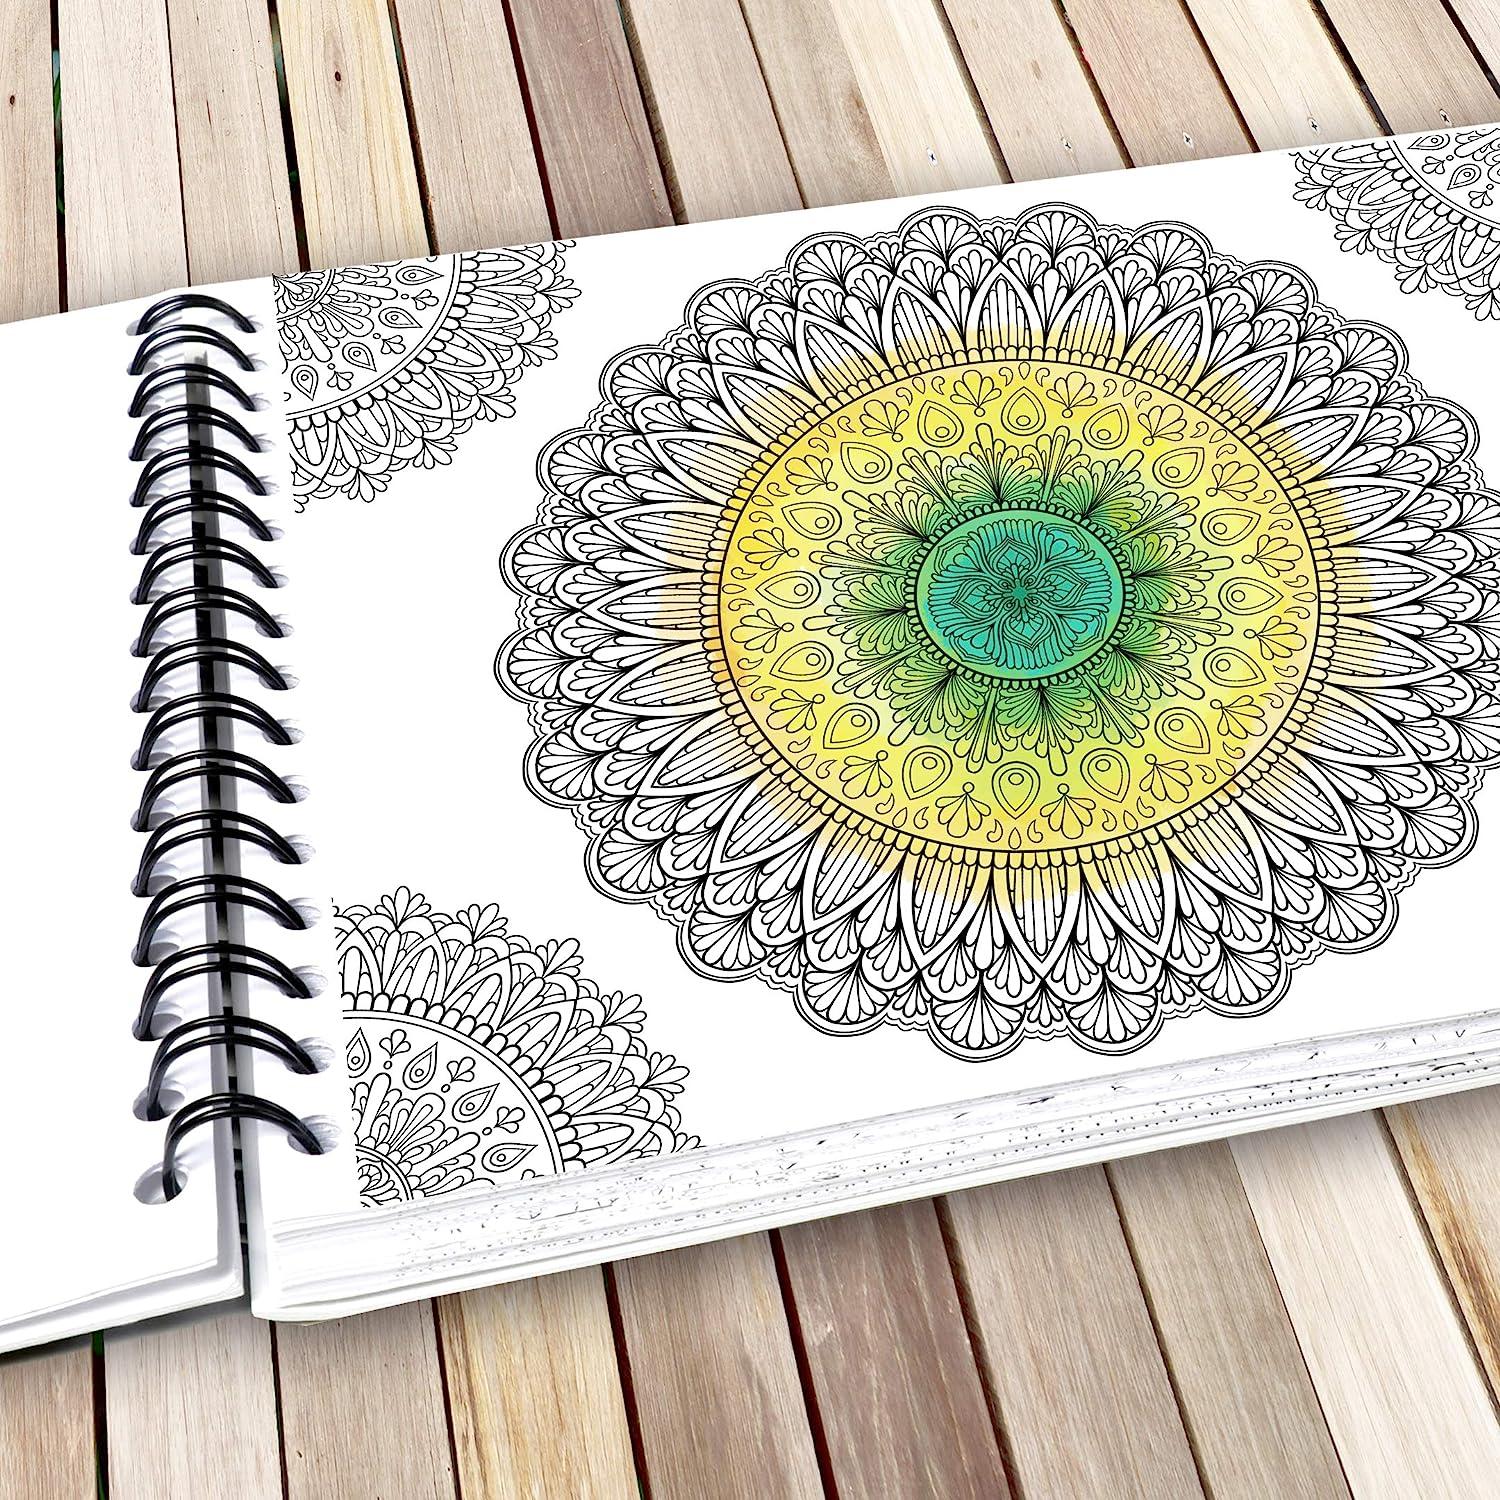 Adult Coloring Books for Women Volume 3: ADULT COLORING BOOKS FOR WOMEN VOLUME 3 is Great for Relaxing Your Mind by Coloring Your Thoughts and is Very Therapeutic for Yourself that You Can Enjoy Coloring Anywhere [Book]